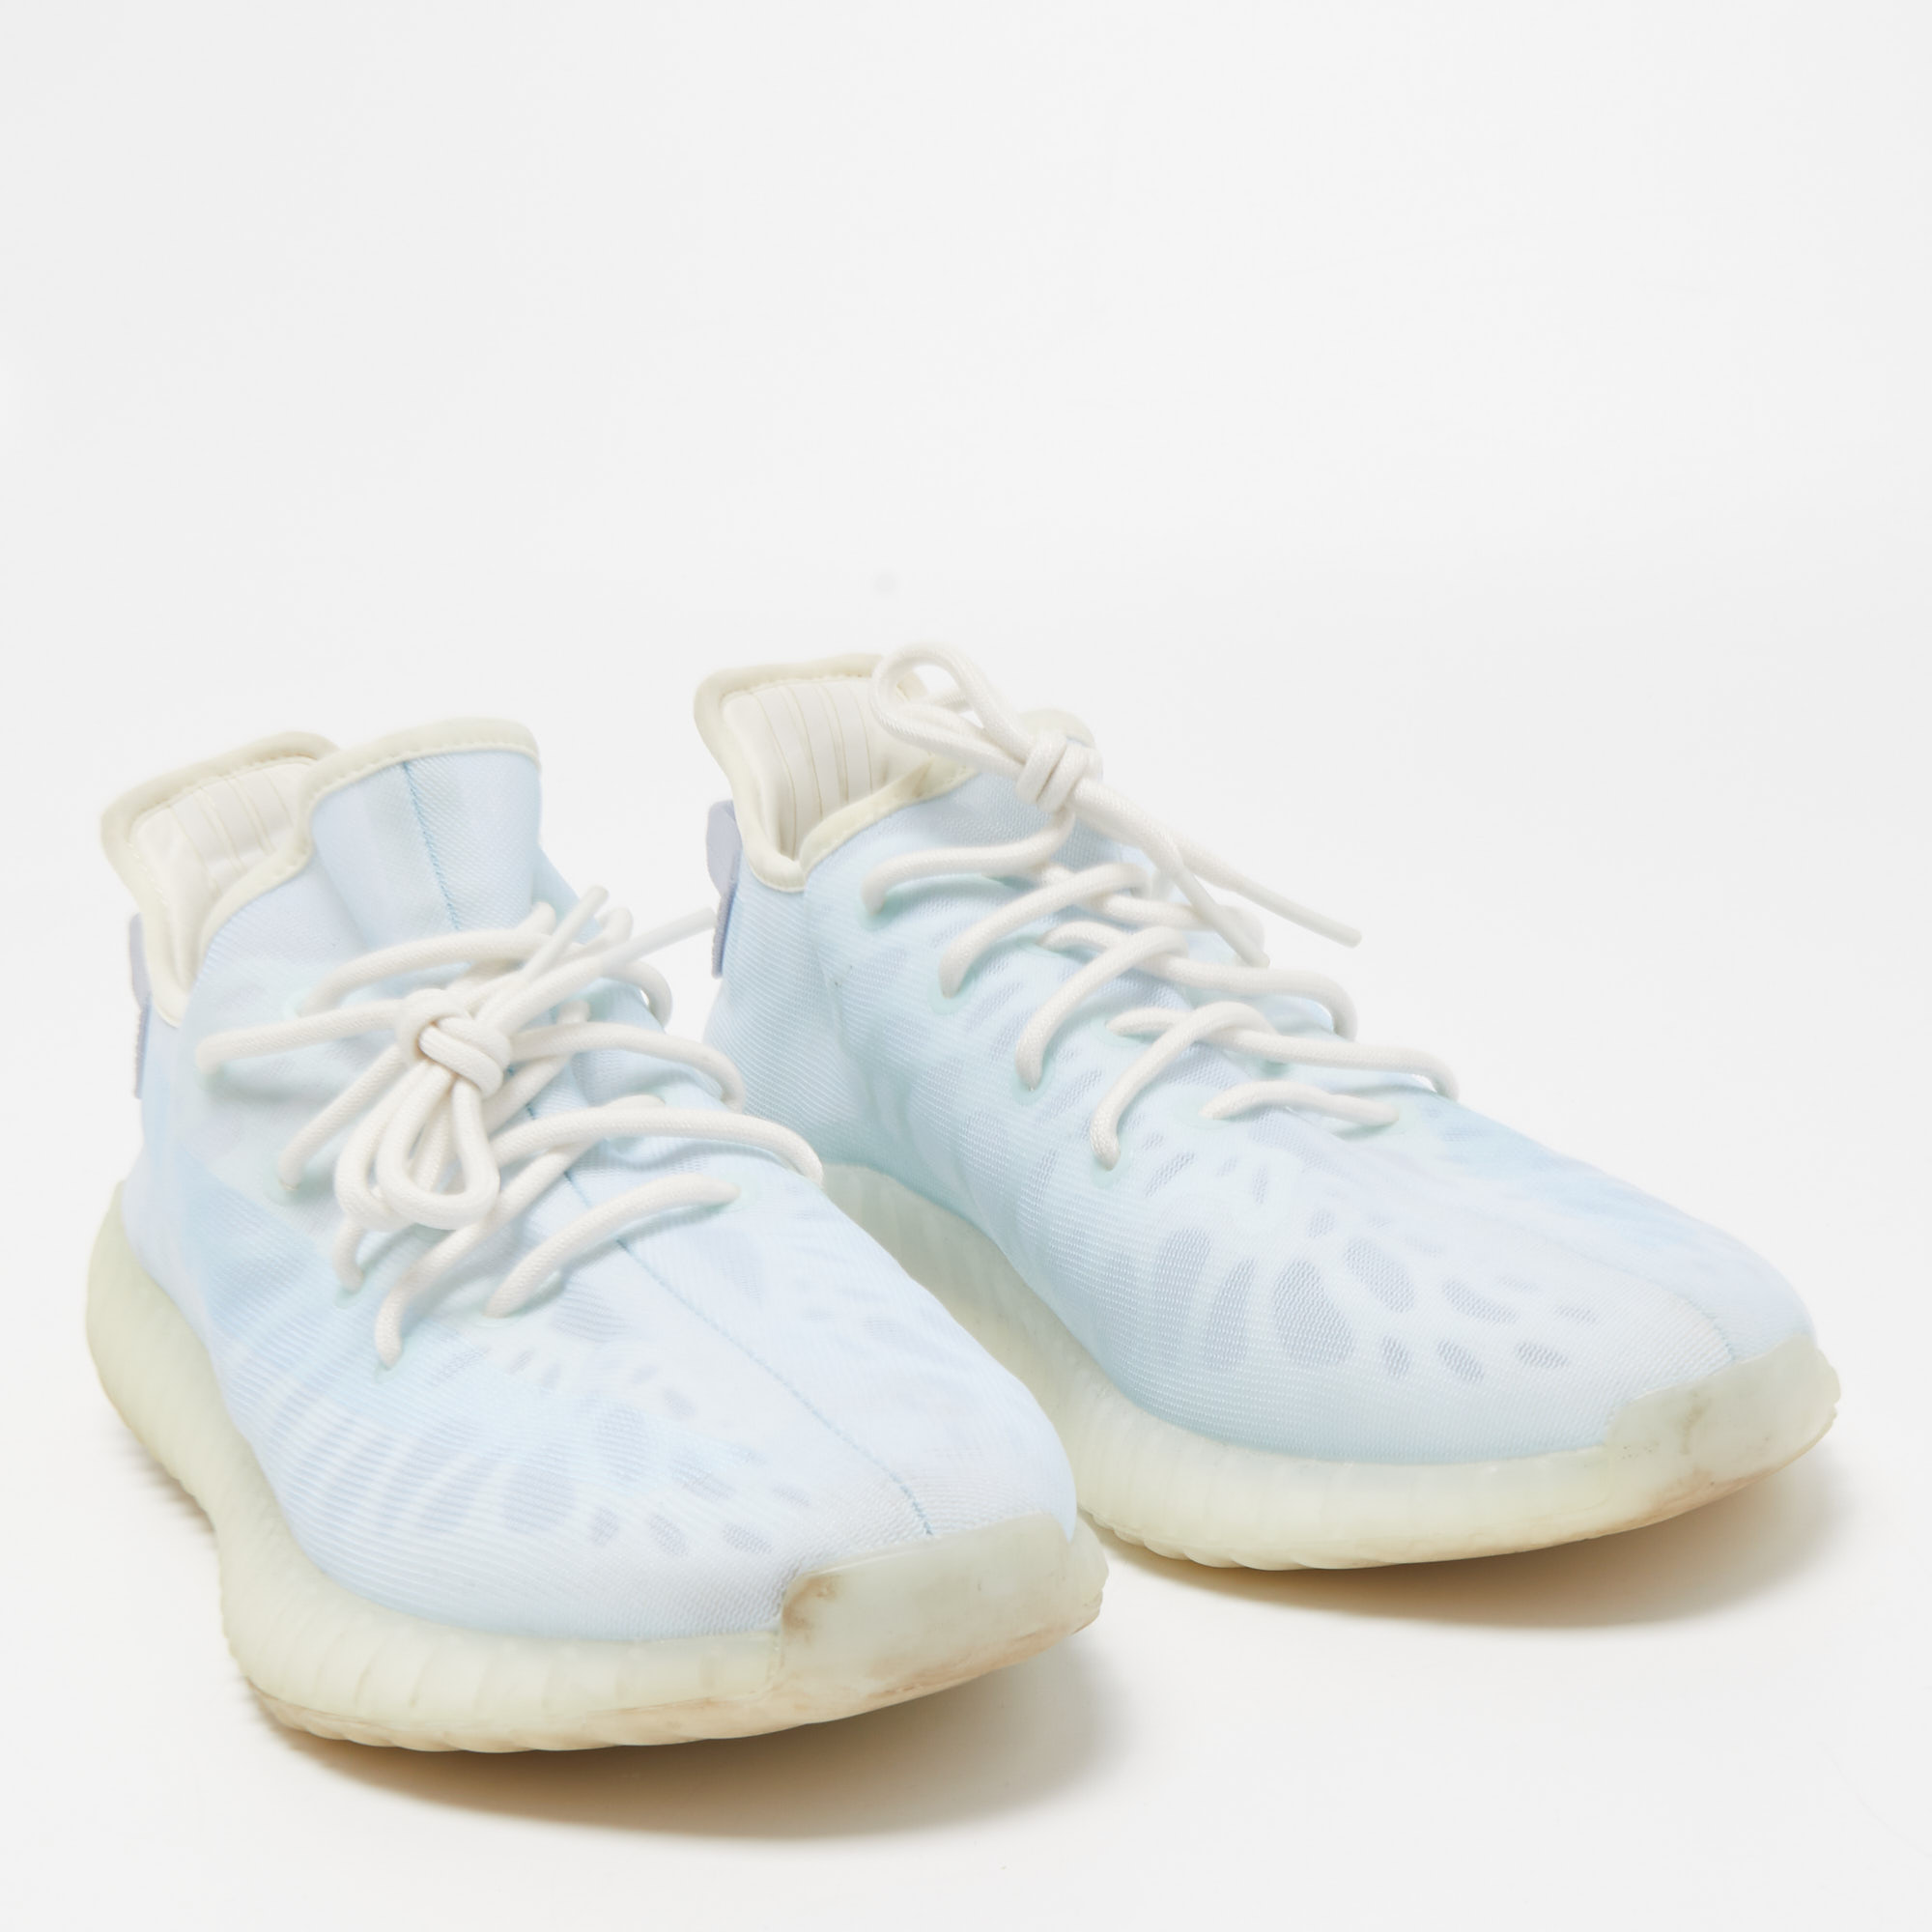 Yeezy X Adidas Light Blue Mesh Boost 350 V2 Mono Ice Sneakers Size 46 2/3